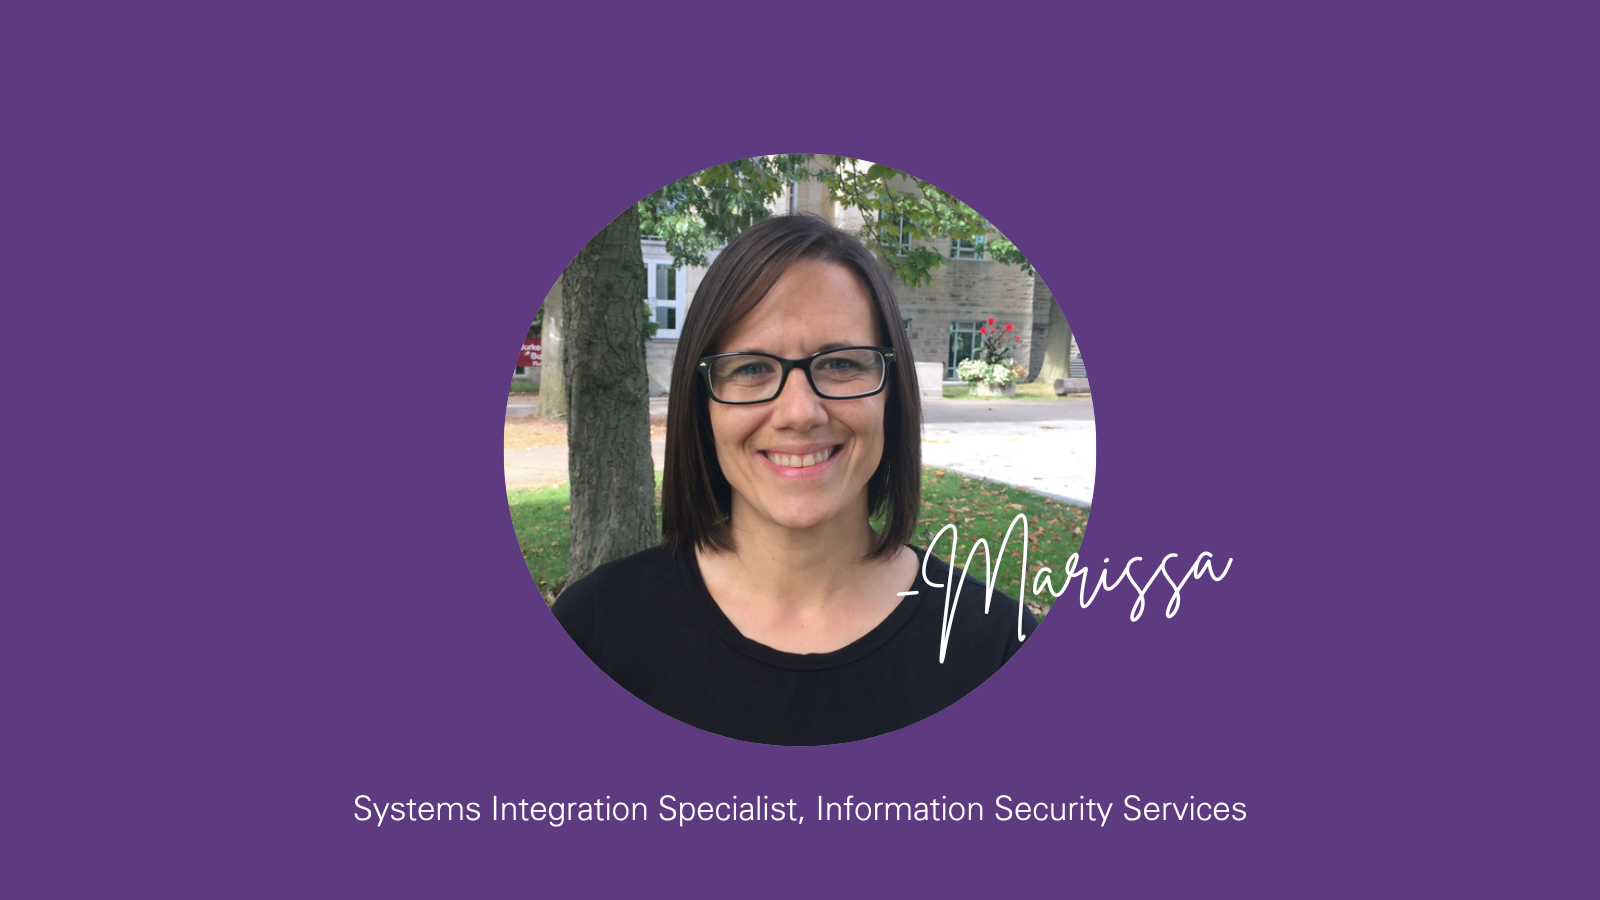 Photo of Marissa Benson, Systems Integration Specialist at McMaster's Information Security Services